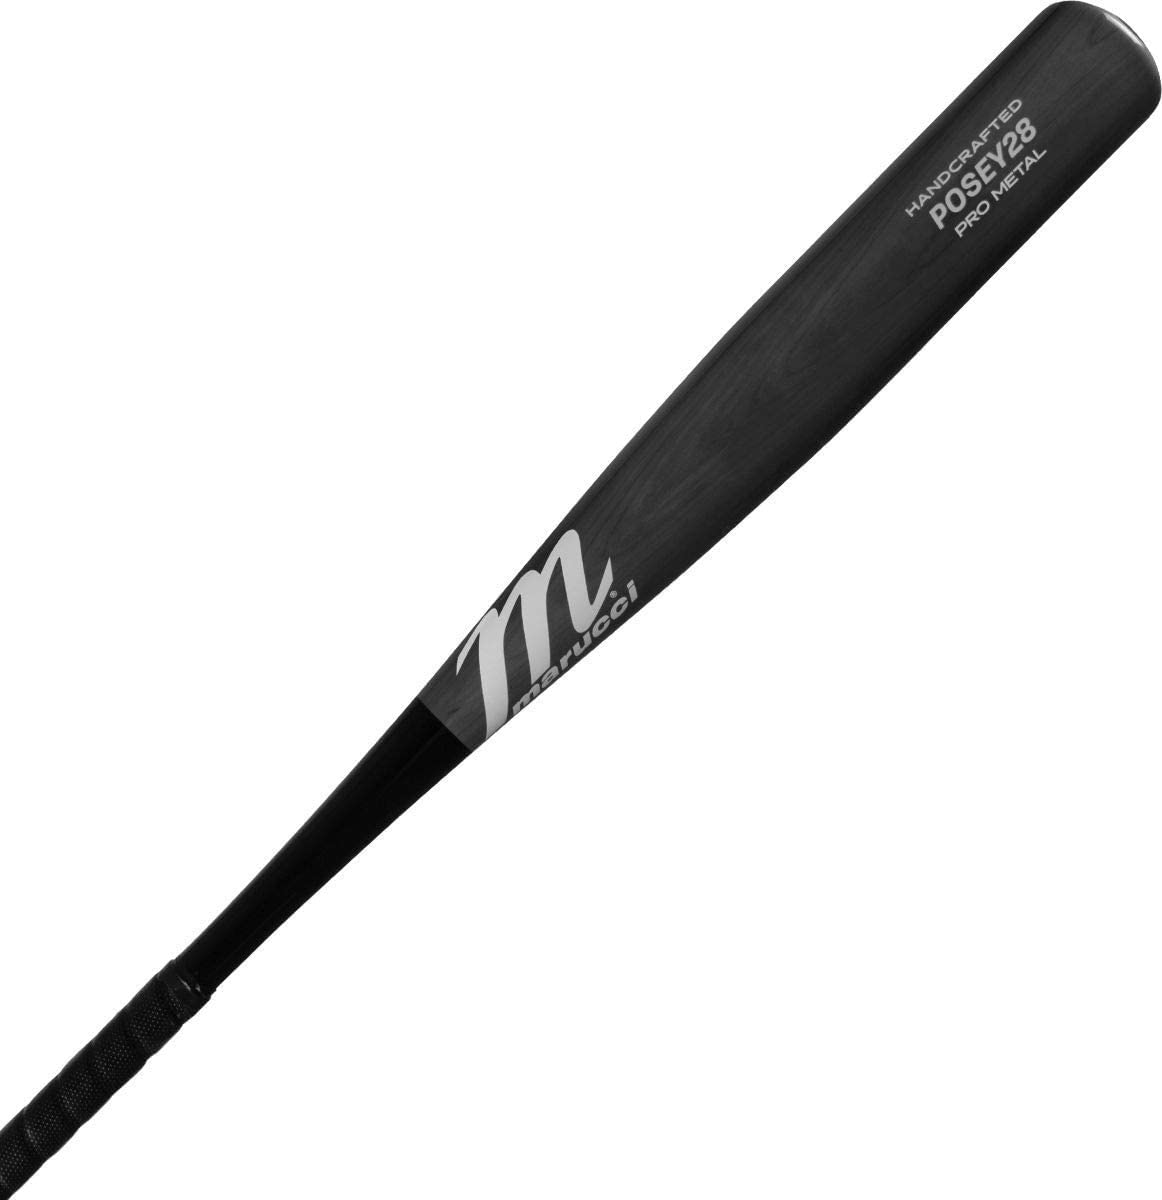  AZ105 alloy, the strongest aluminum on the Marucci bat line, allows for thinner barrel walls, a higher response rate and better durability Multi-variable wall design creates an expanded sweet spot and thinner barrel walls that are more forgiving after off-centered contact 2nd Generation AV2 Anti-Vibration knob features an upgraded, finely tuned harmonic dampening system for better feel and less negative vibrational feedback Ring-free barrel construction allows for more barrel flex and increases performance with no dead spots One-piece alloy construction provides a clean, consistent, traditional swing 